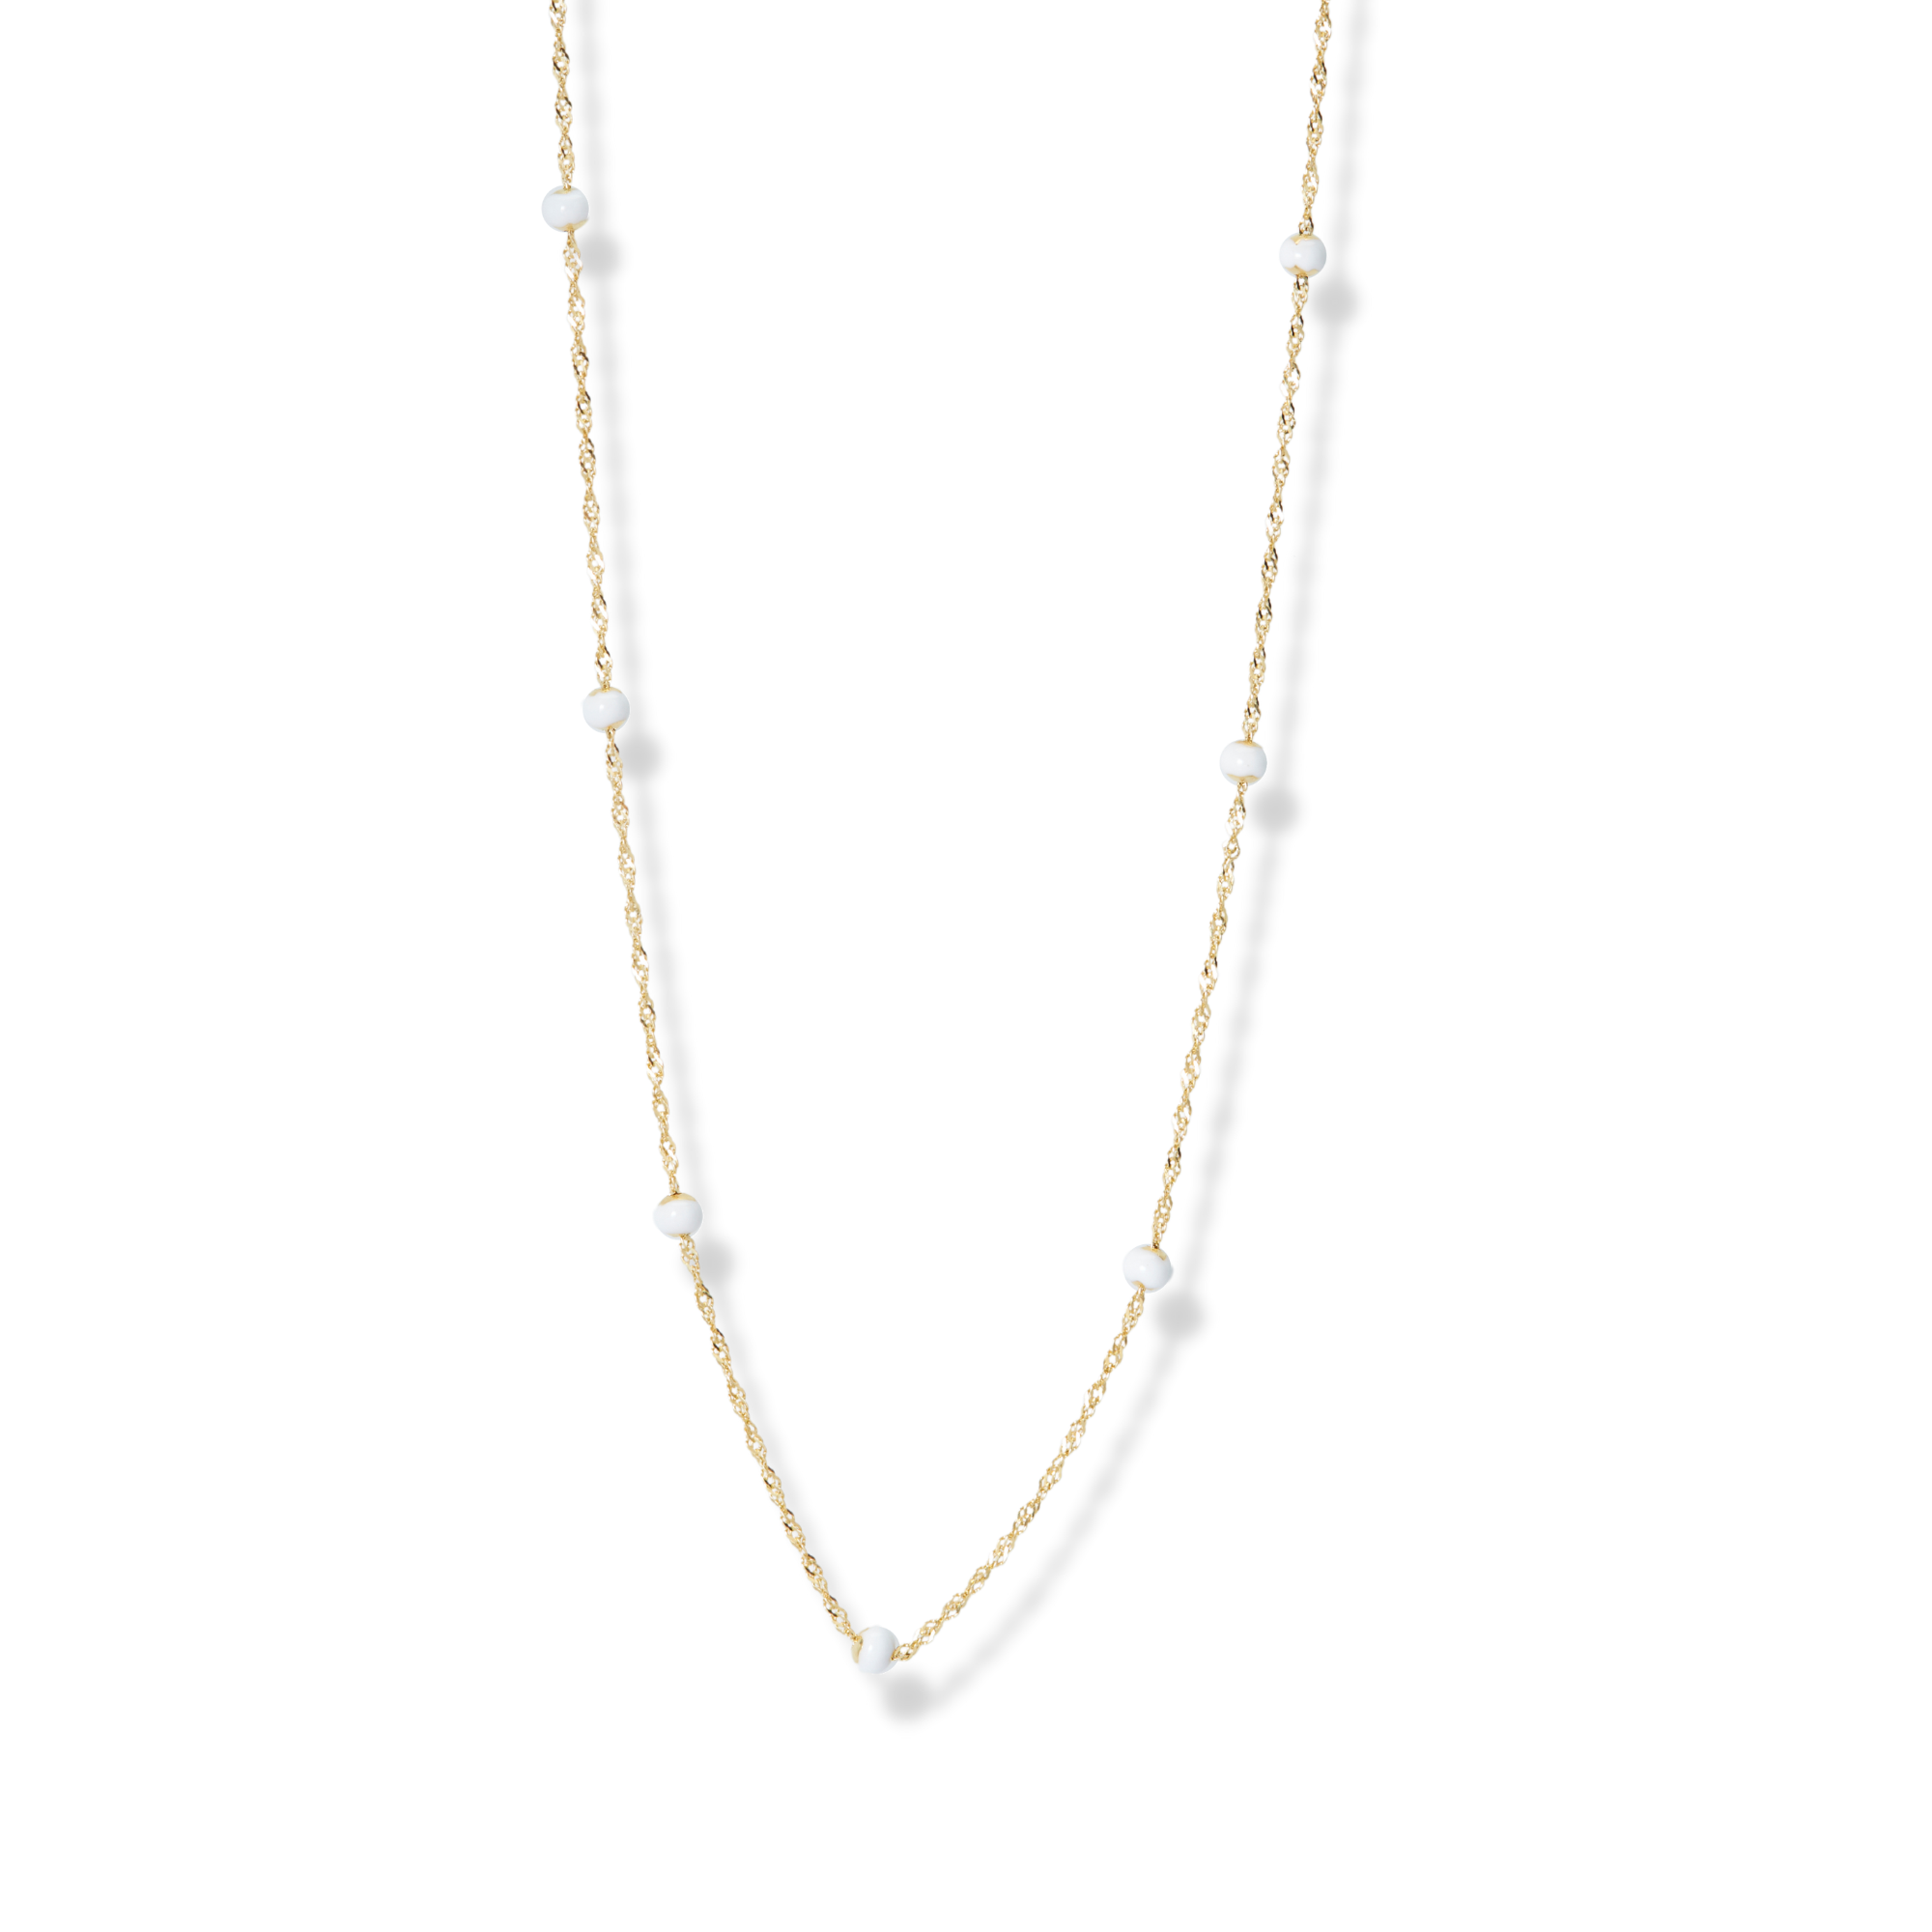 THE WHITE BALL CHAIN NECKLACE